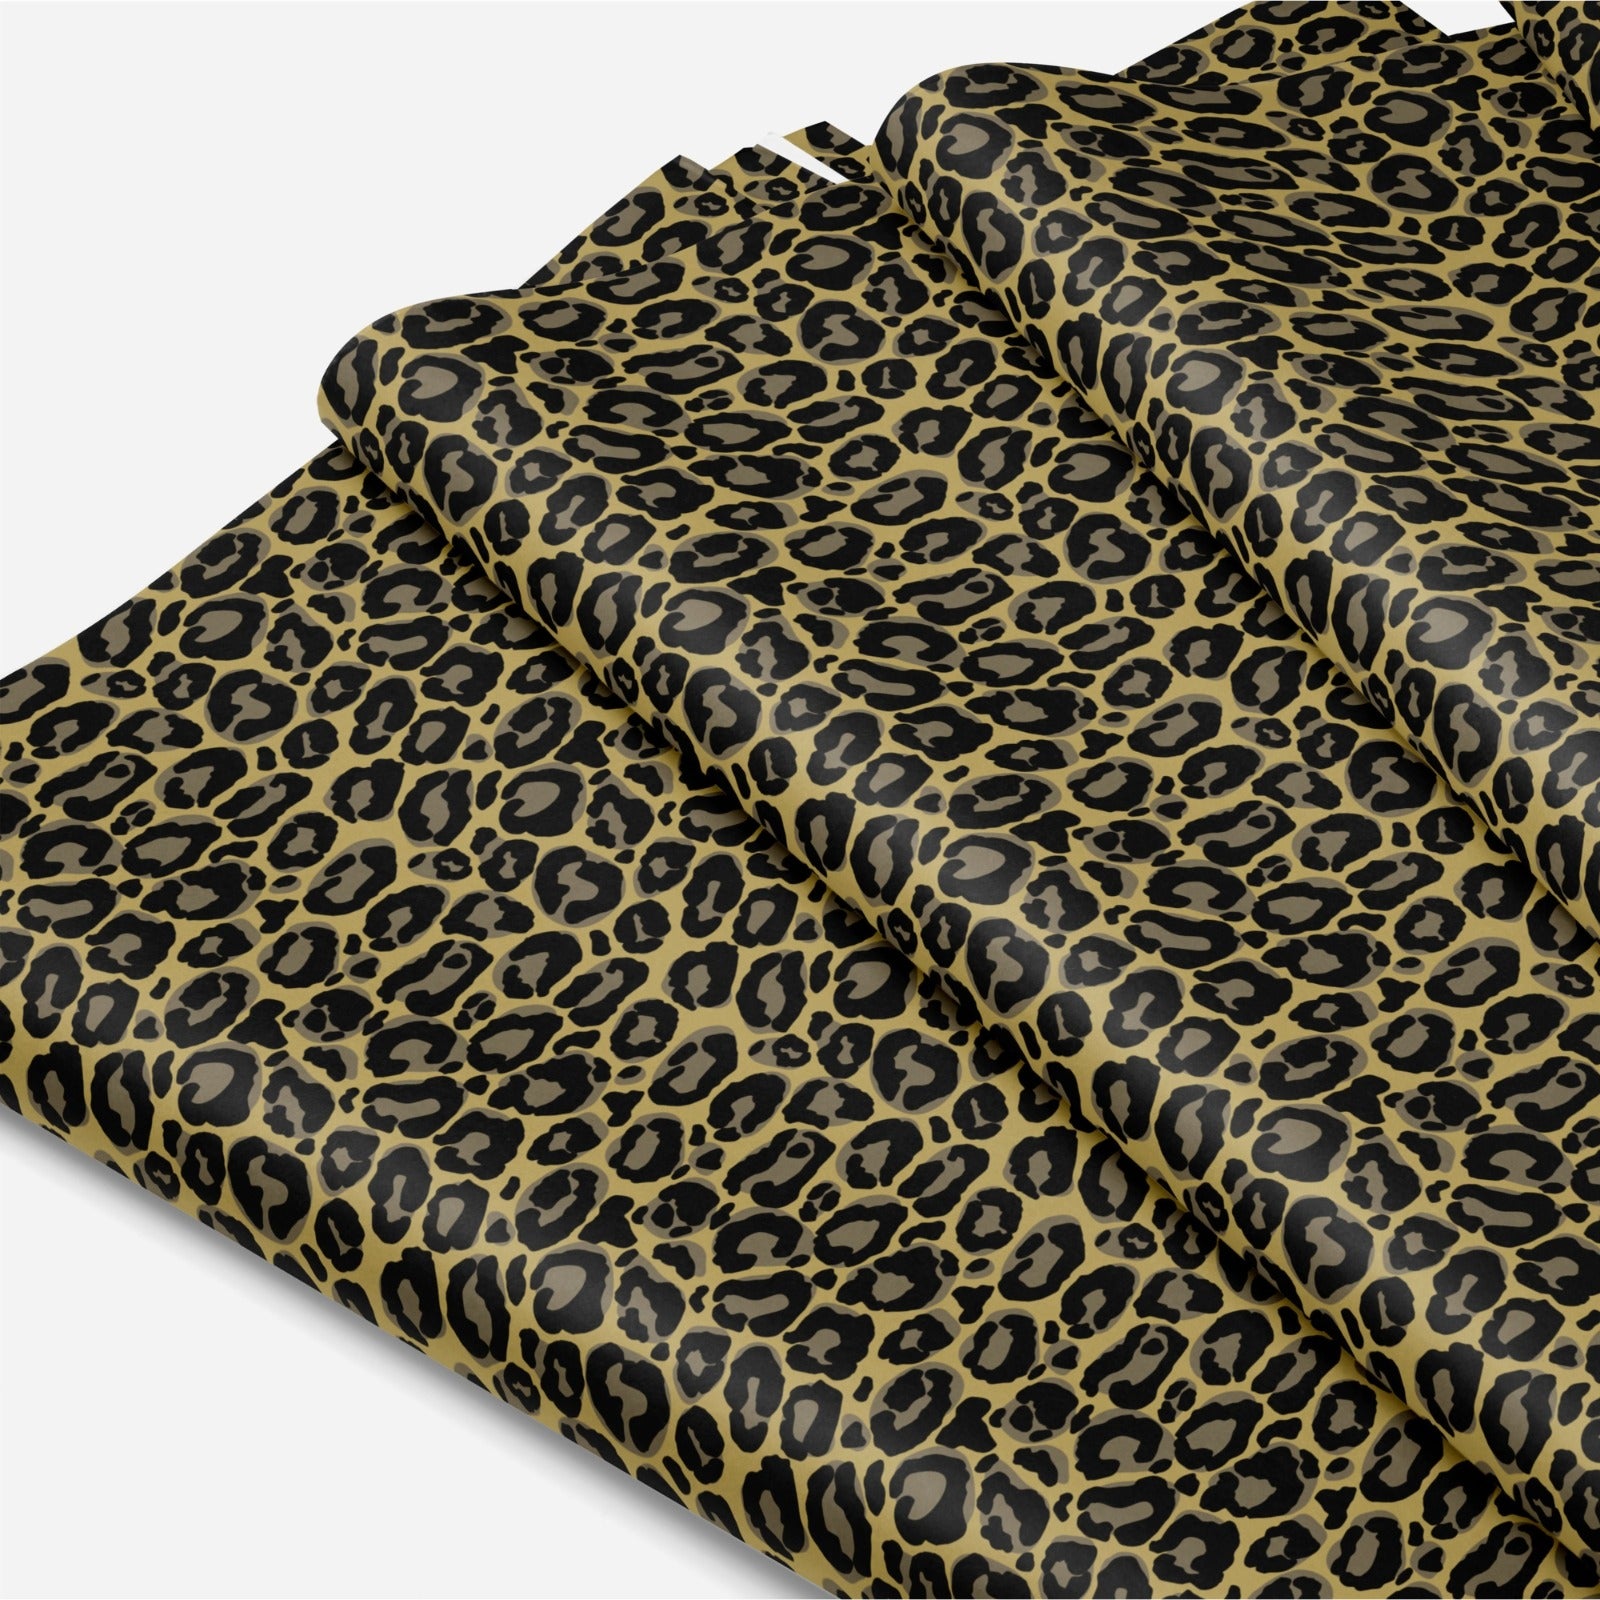 Leopard Tissue Paper (100 Sheets, 20x30 inch)